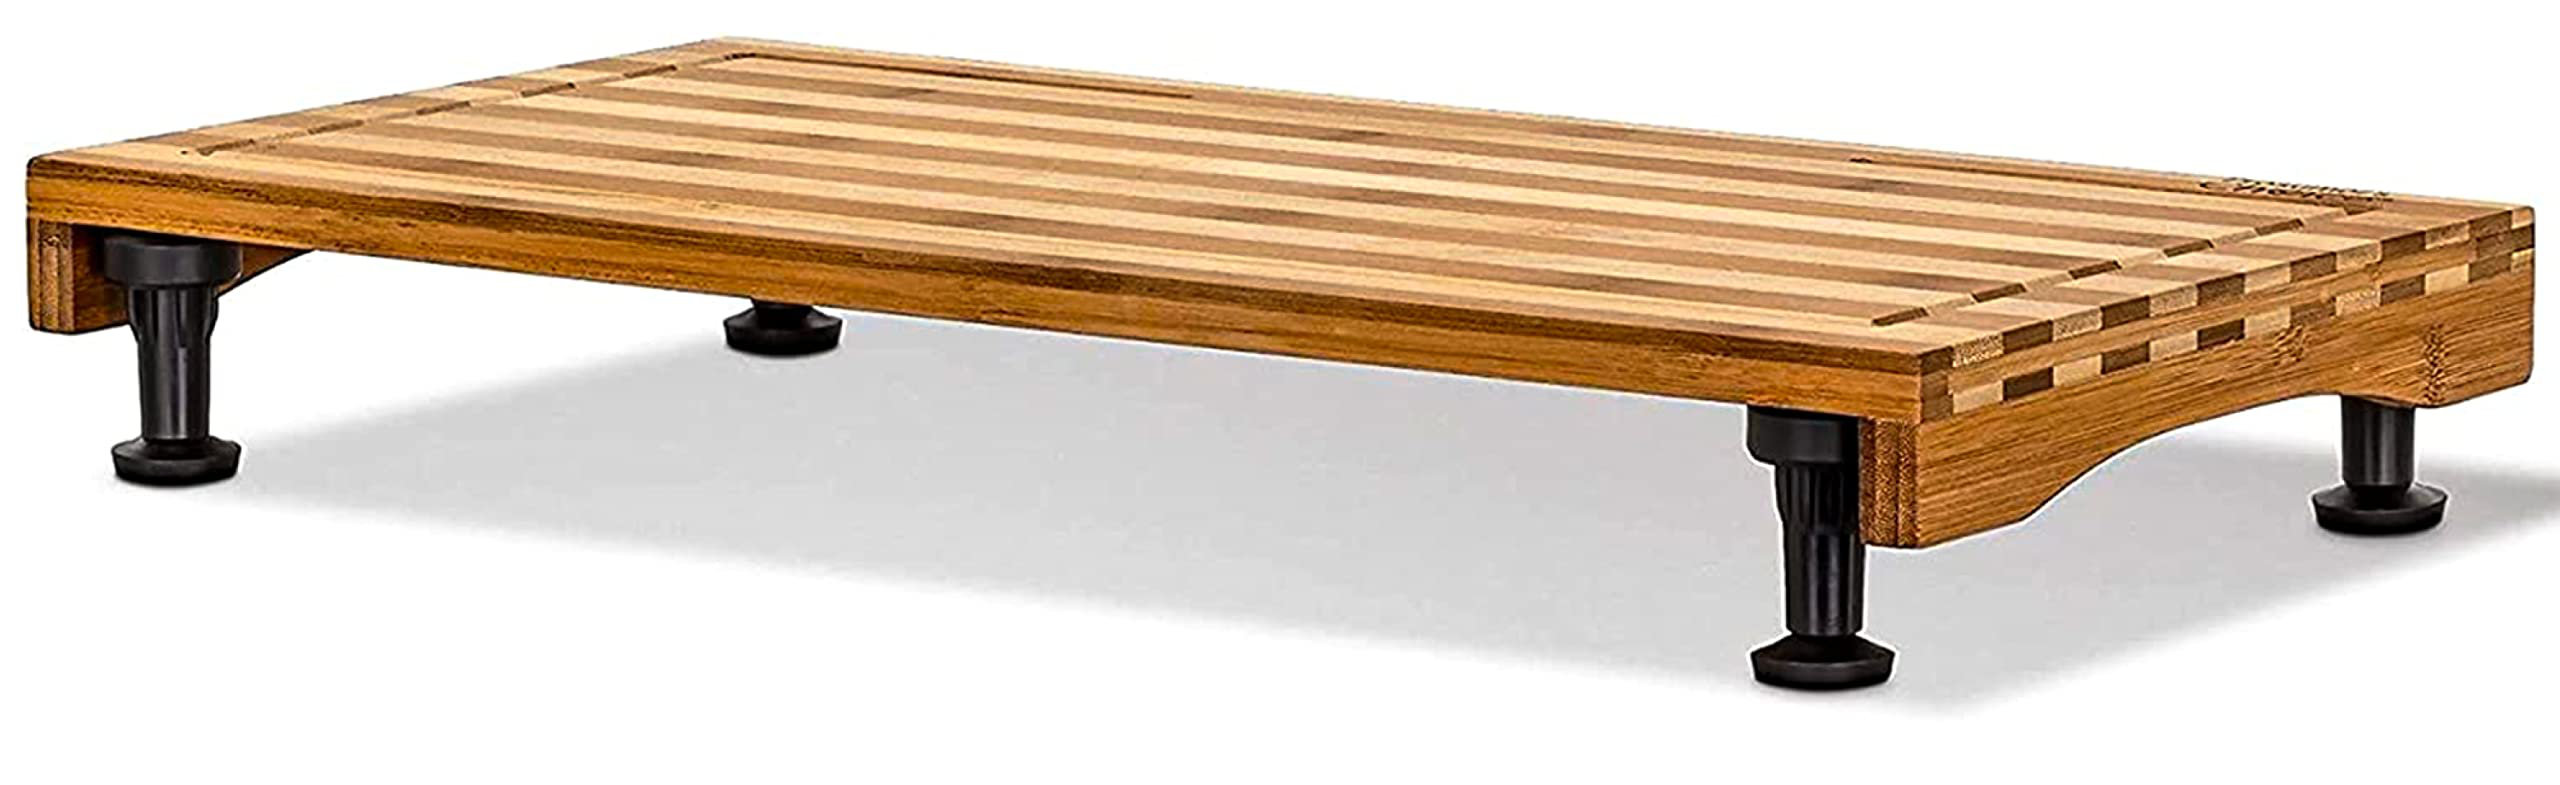 Lipper Expandable Over the Sink Cutting Board Bamboo